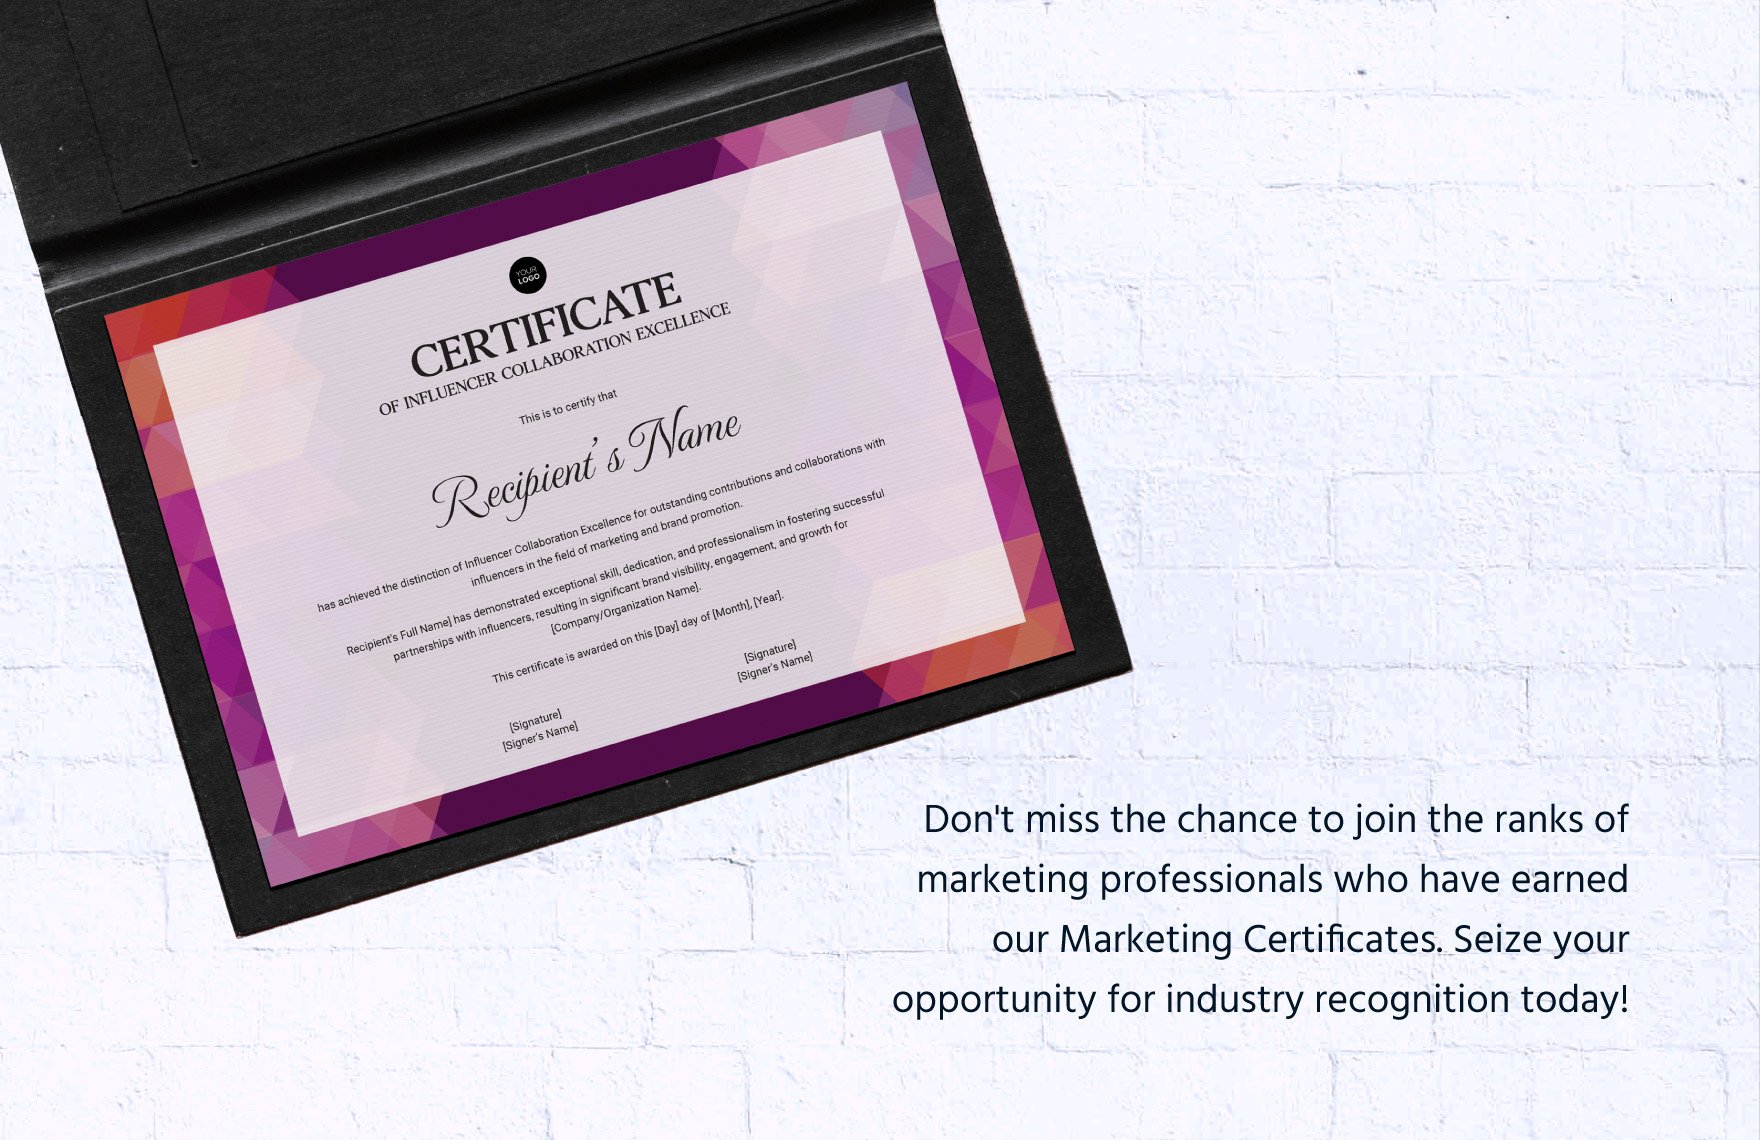 Influencer Collaboration Excellence Certificate Template